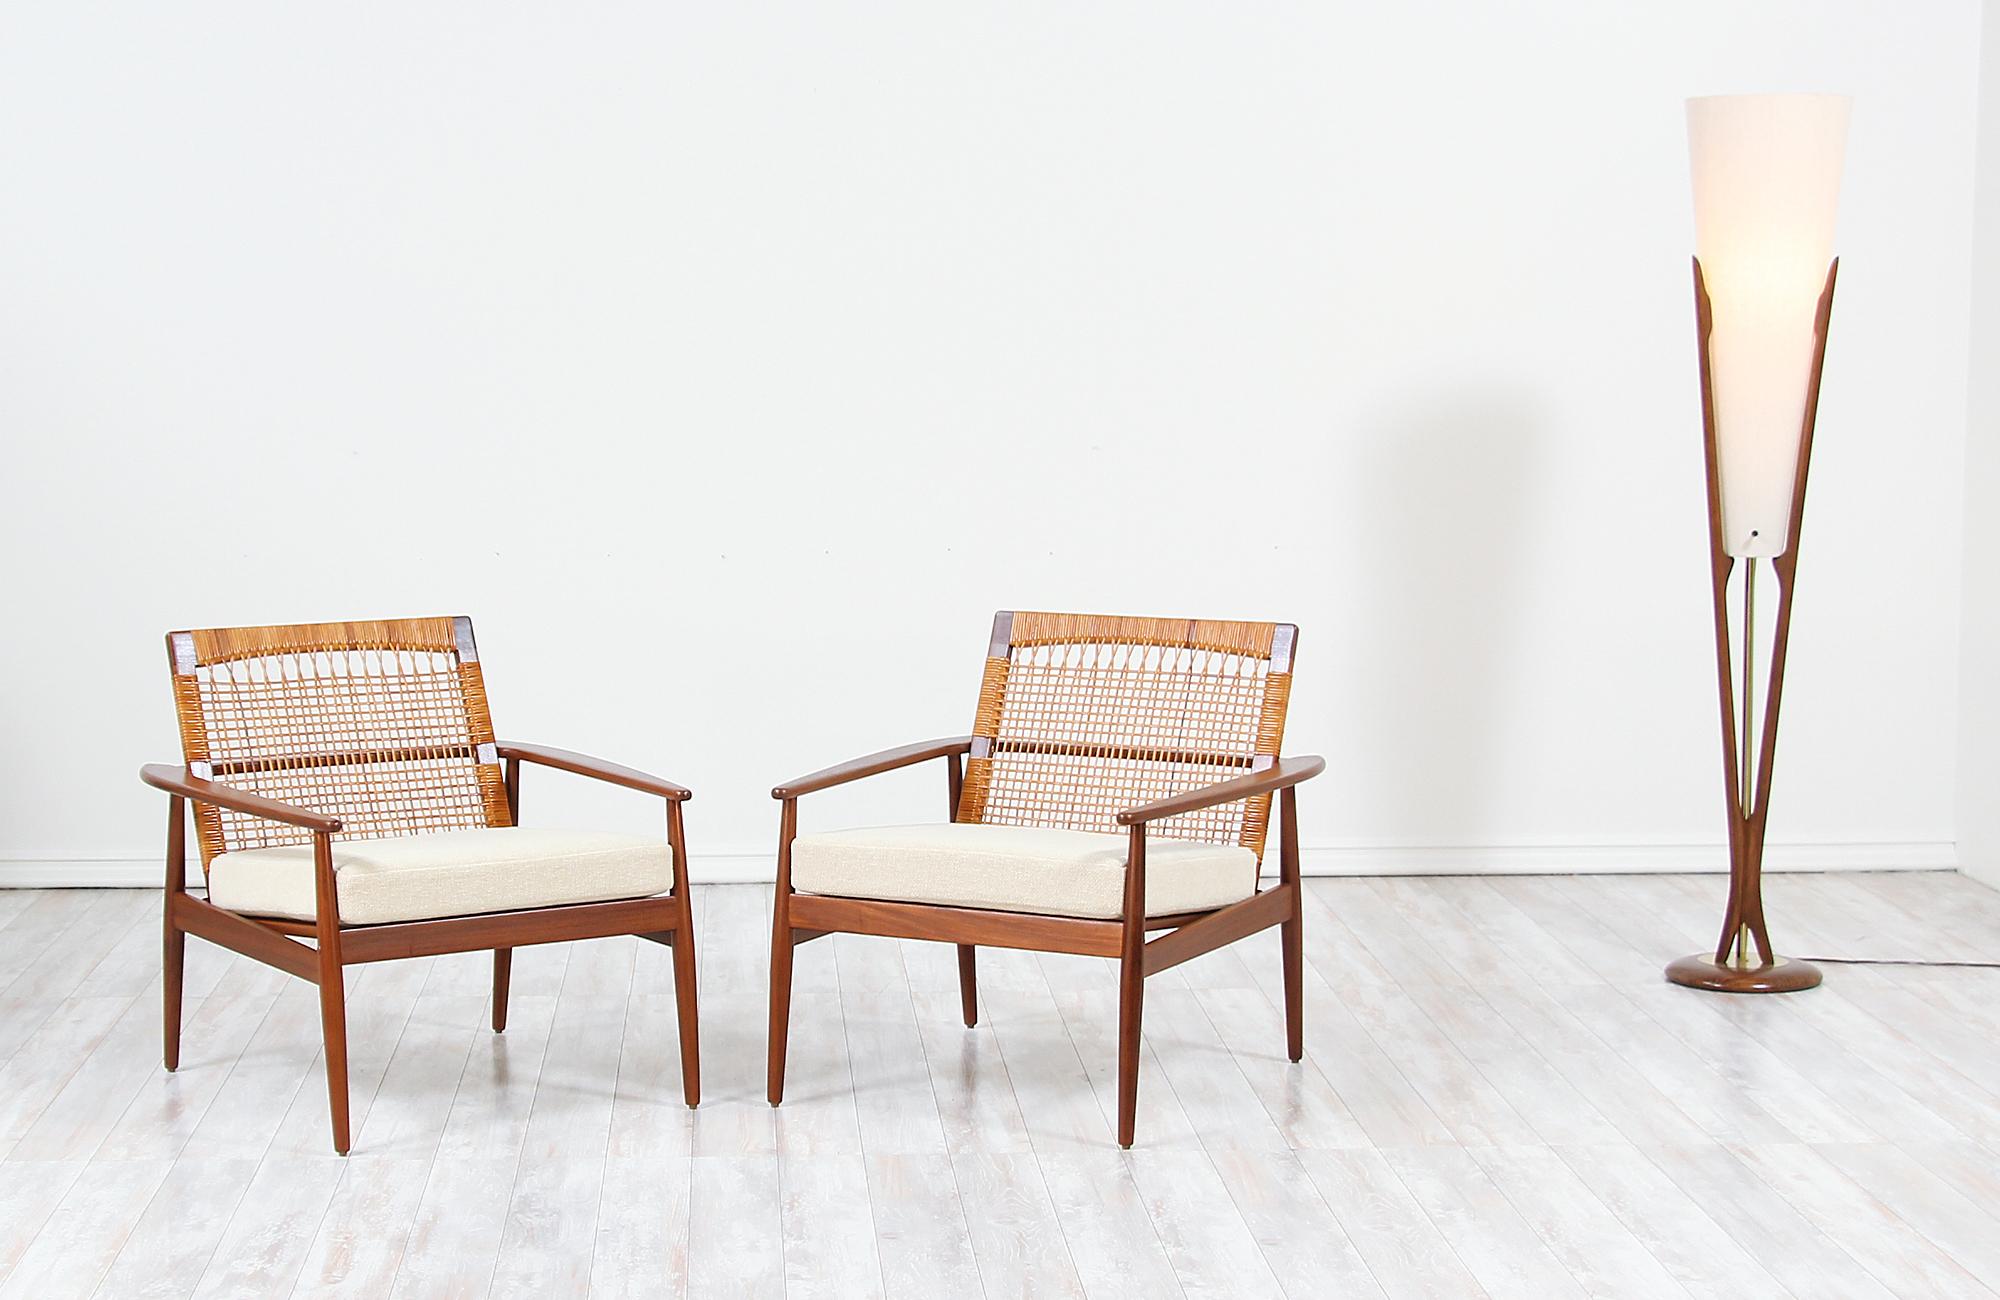 Pair of Danish modern lounge chairs designed by Hans Olsen for Juul Kristensen in Denmark, circa 1960s. This iconic chair design by Hans Olsen is constructed from solid Afromosia teak wood that is found only in Africa, its original Danish woven